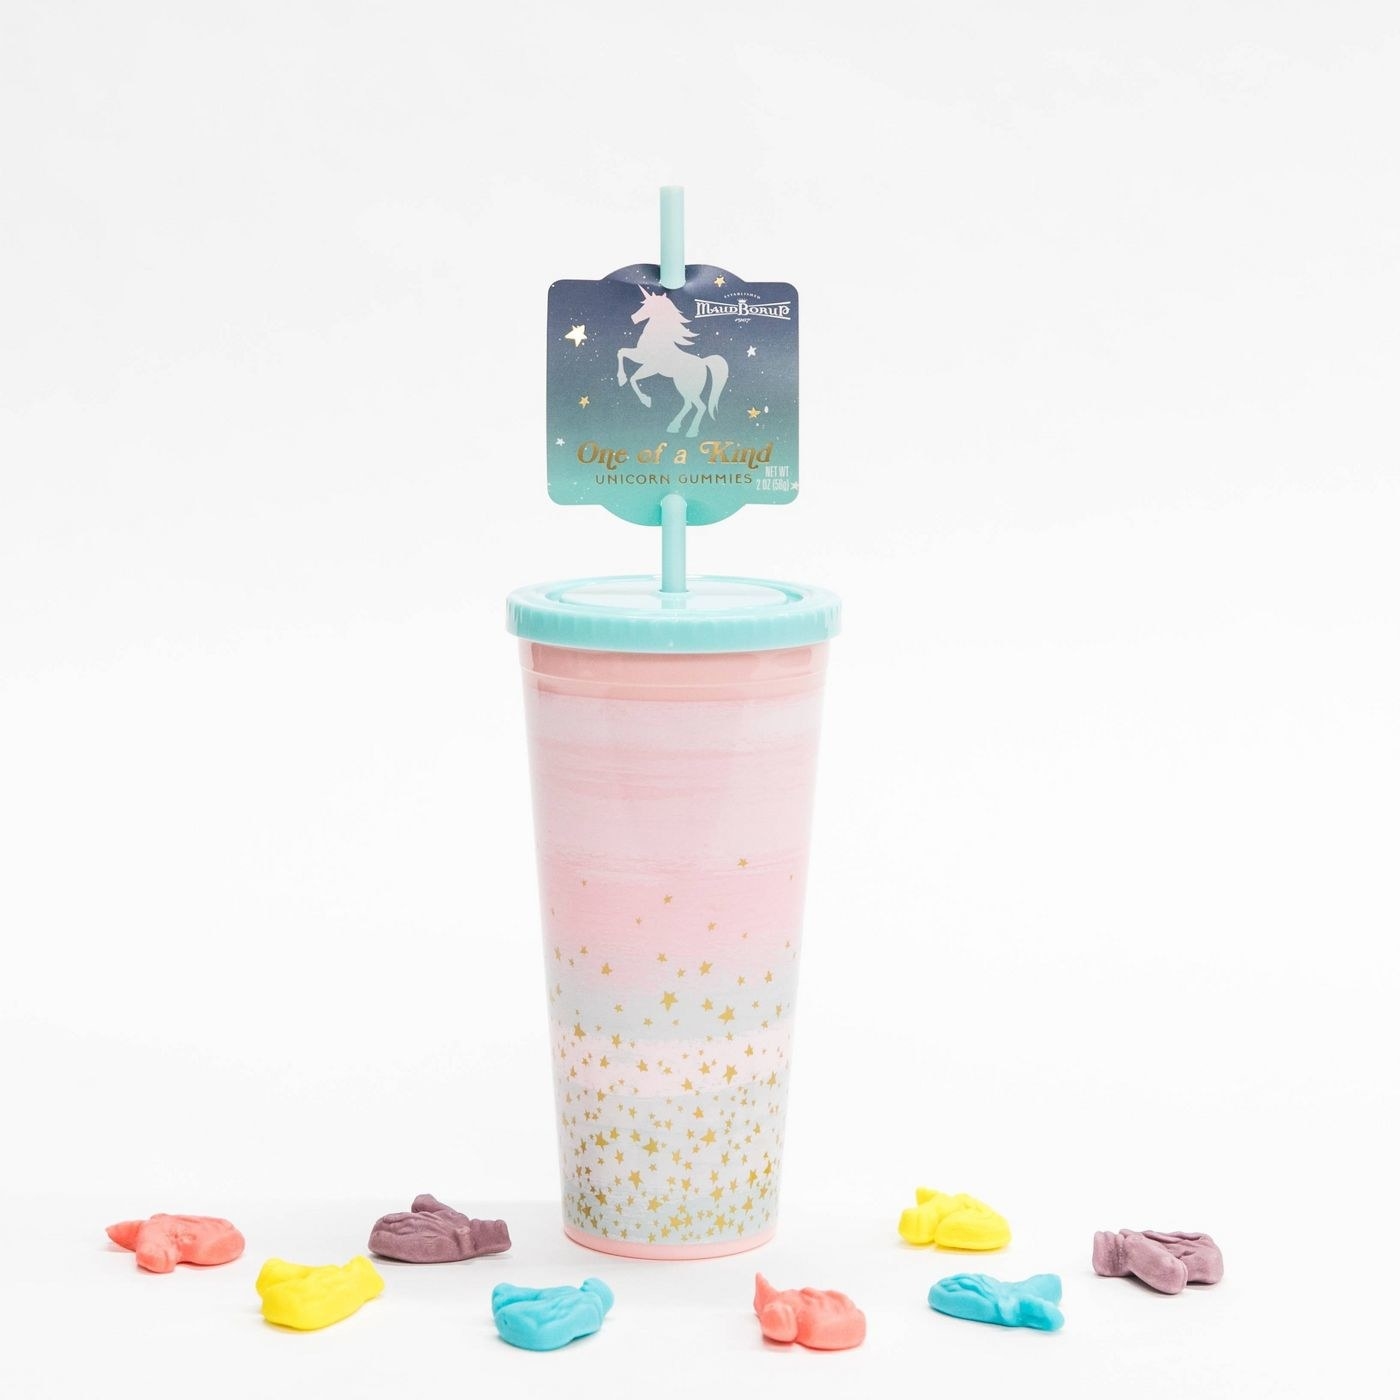 The tumbler, which has a light pink tone with light blue and white patches and gold-colored glitter flecks, as well as a light blue top and straw